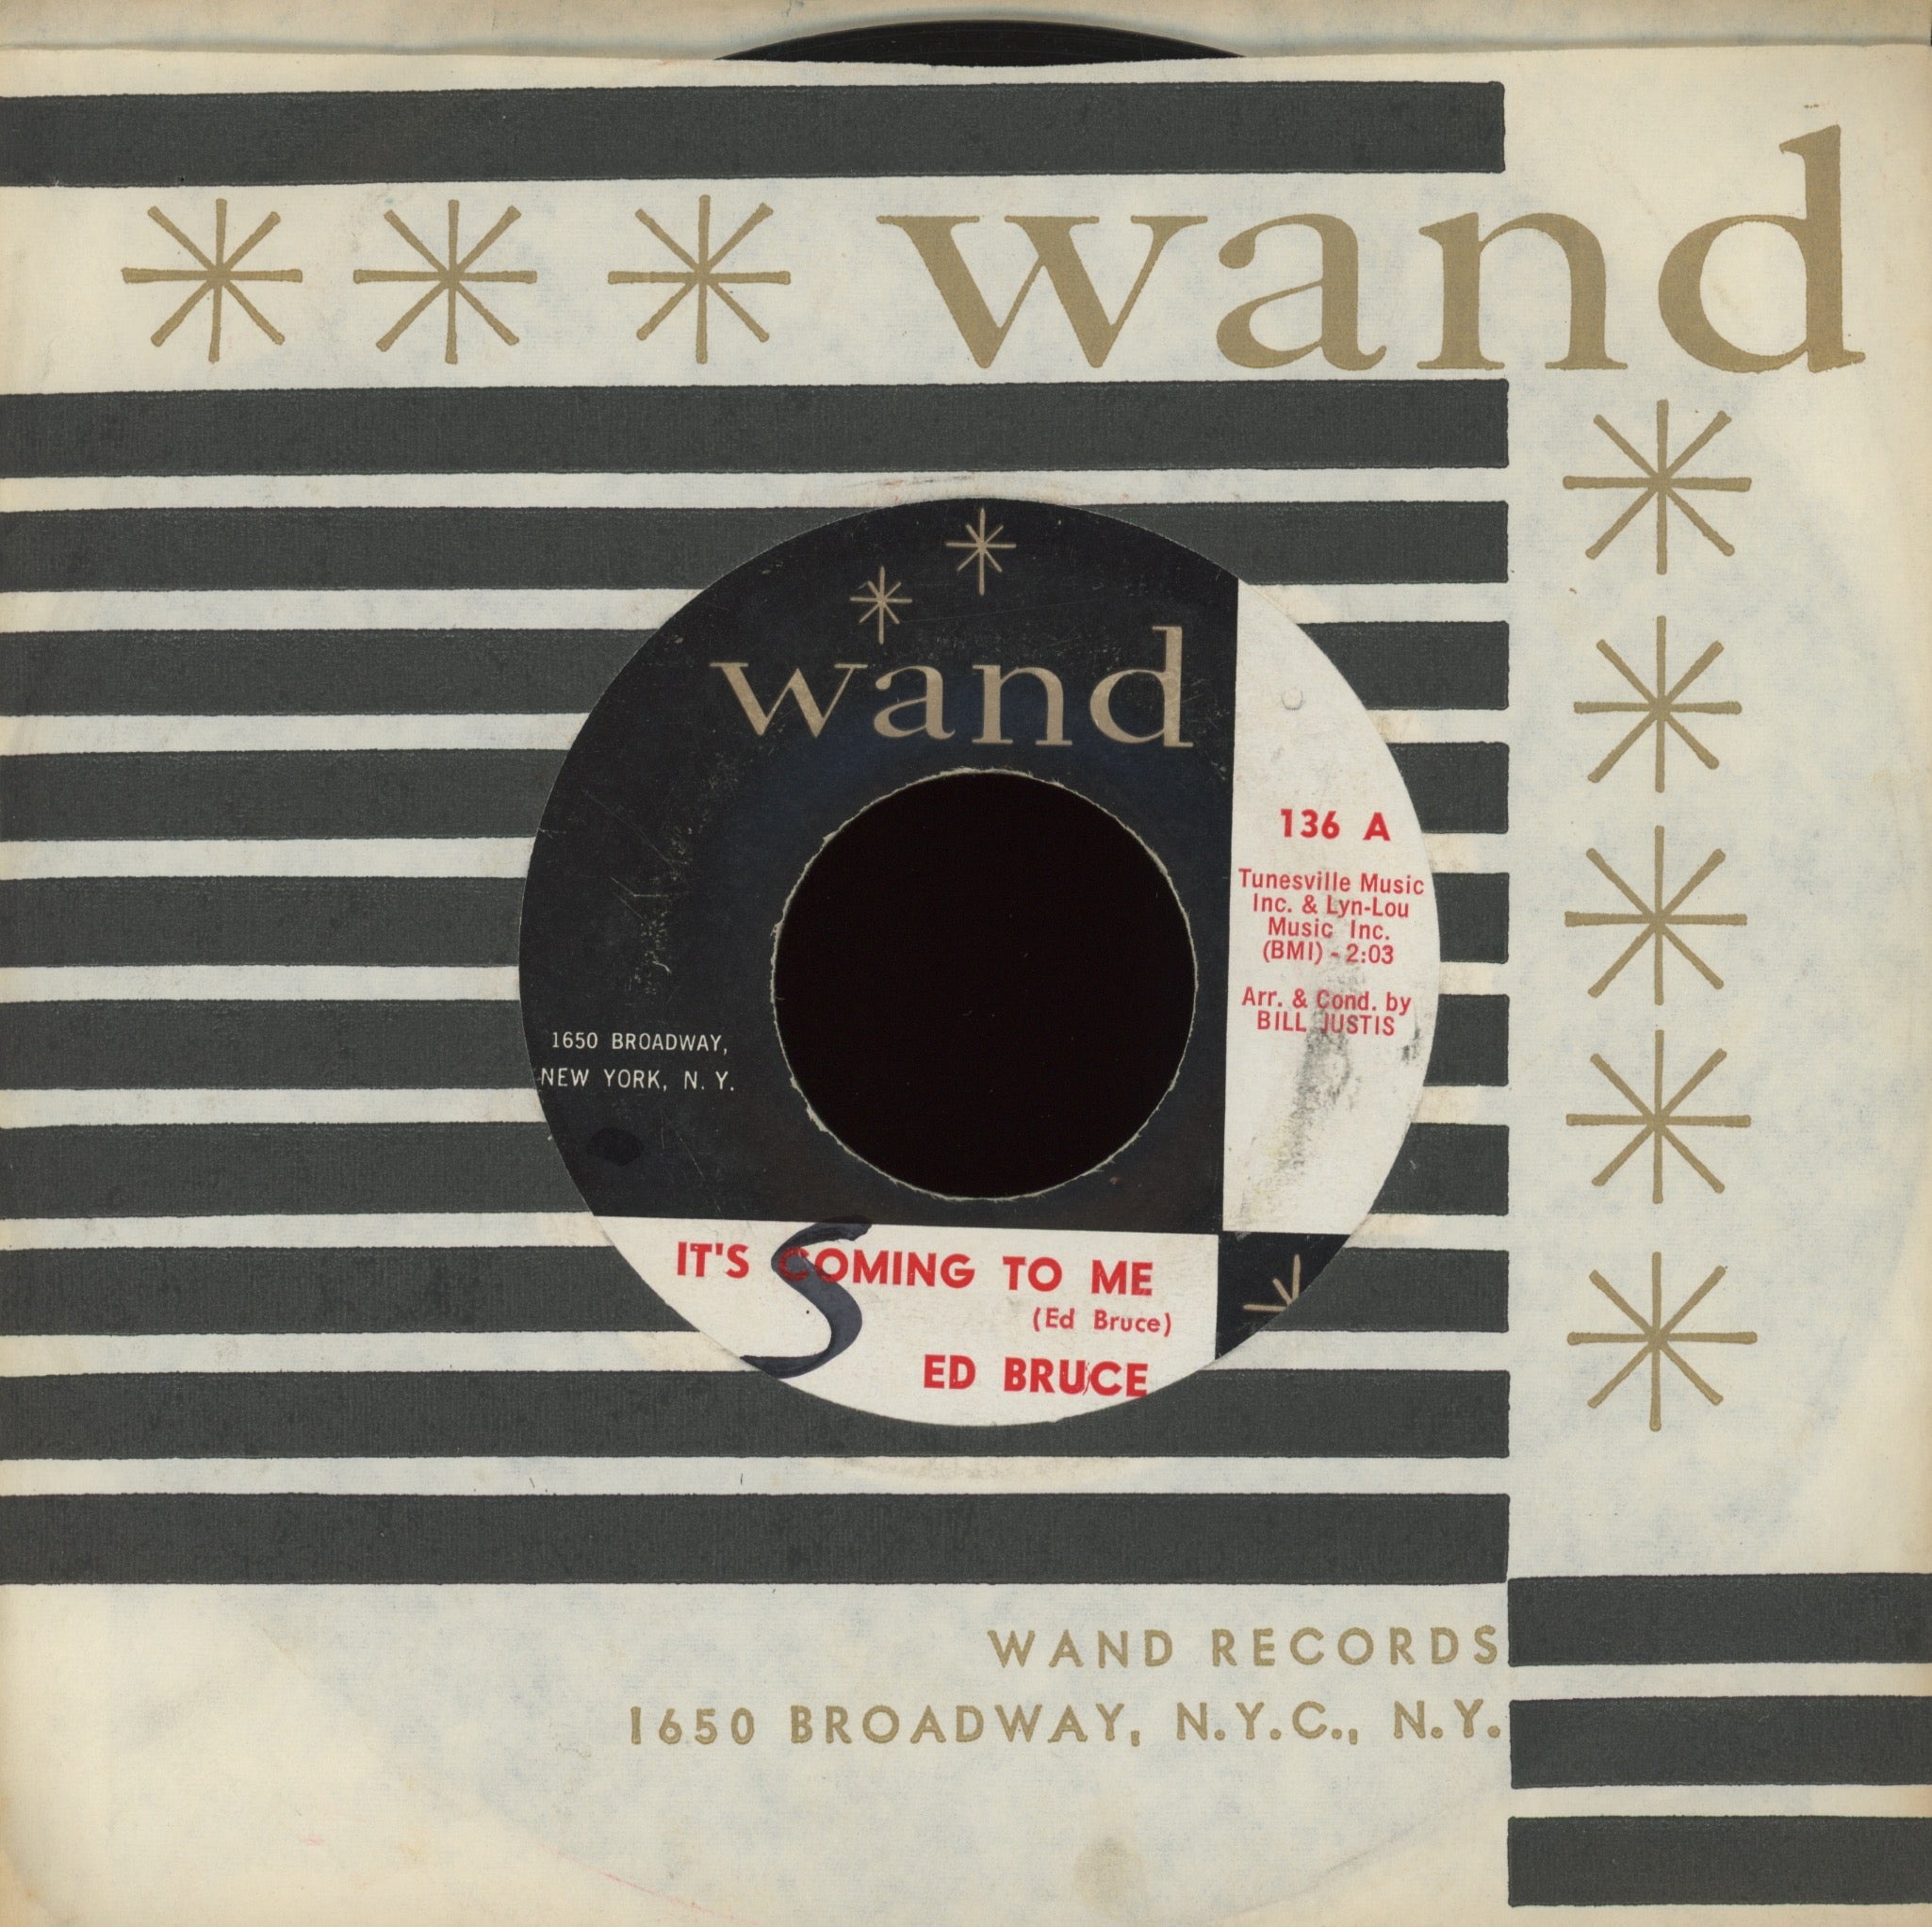 Ed Bruce - It's Coming To Me on Wand Rock 45